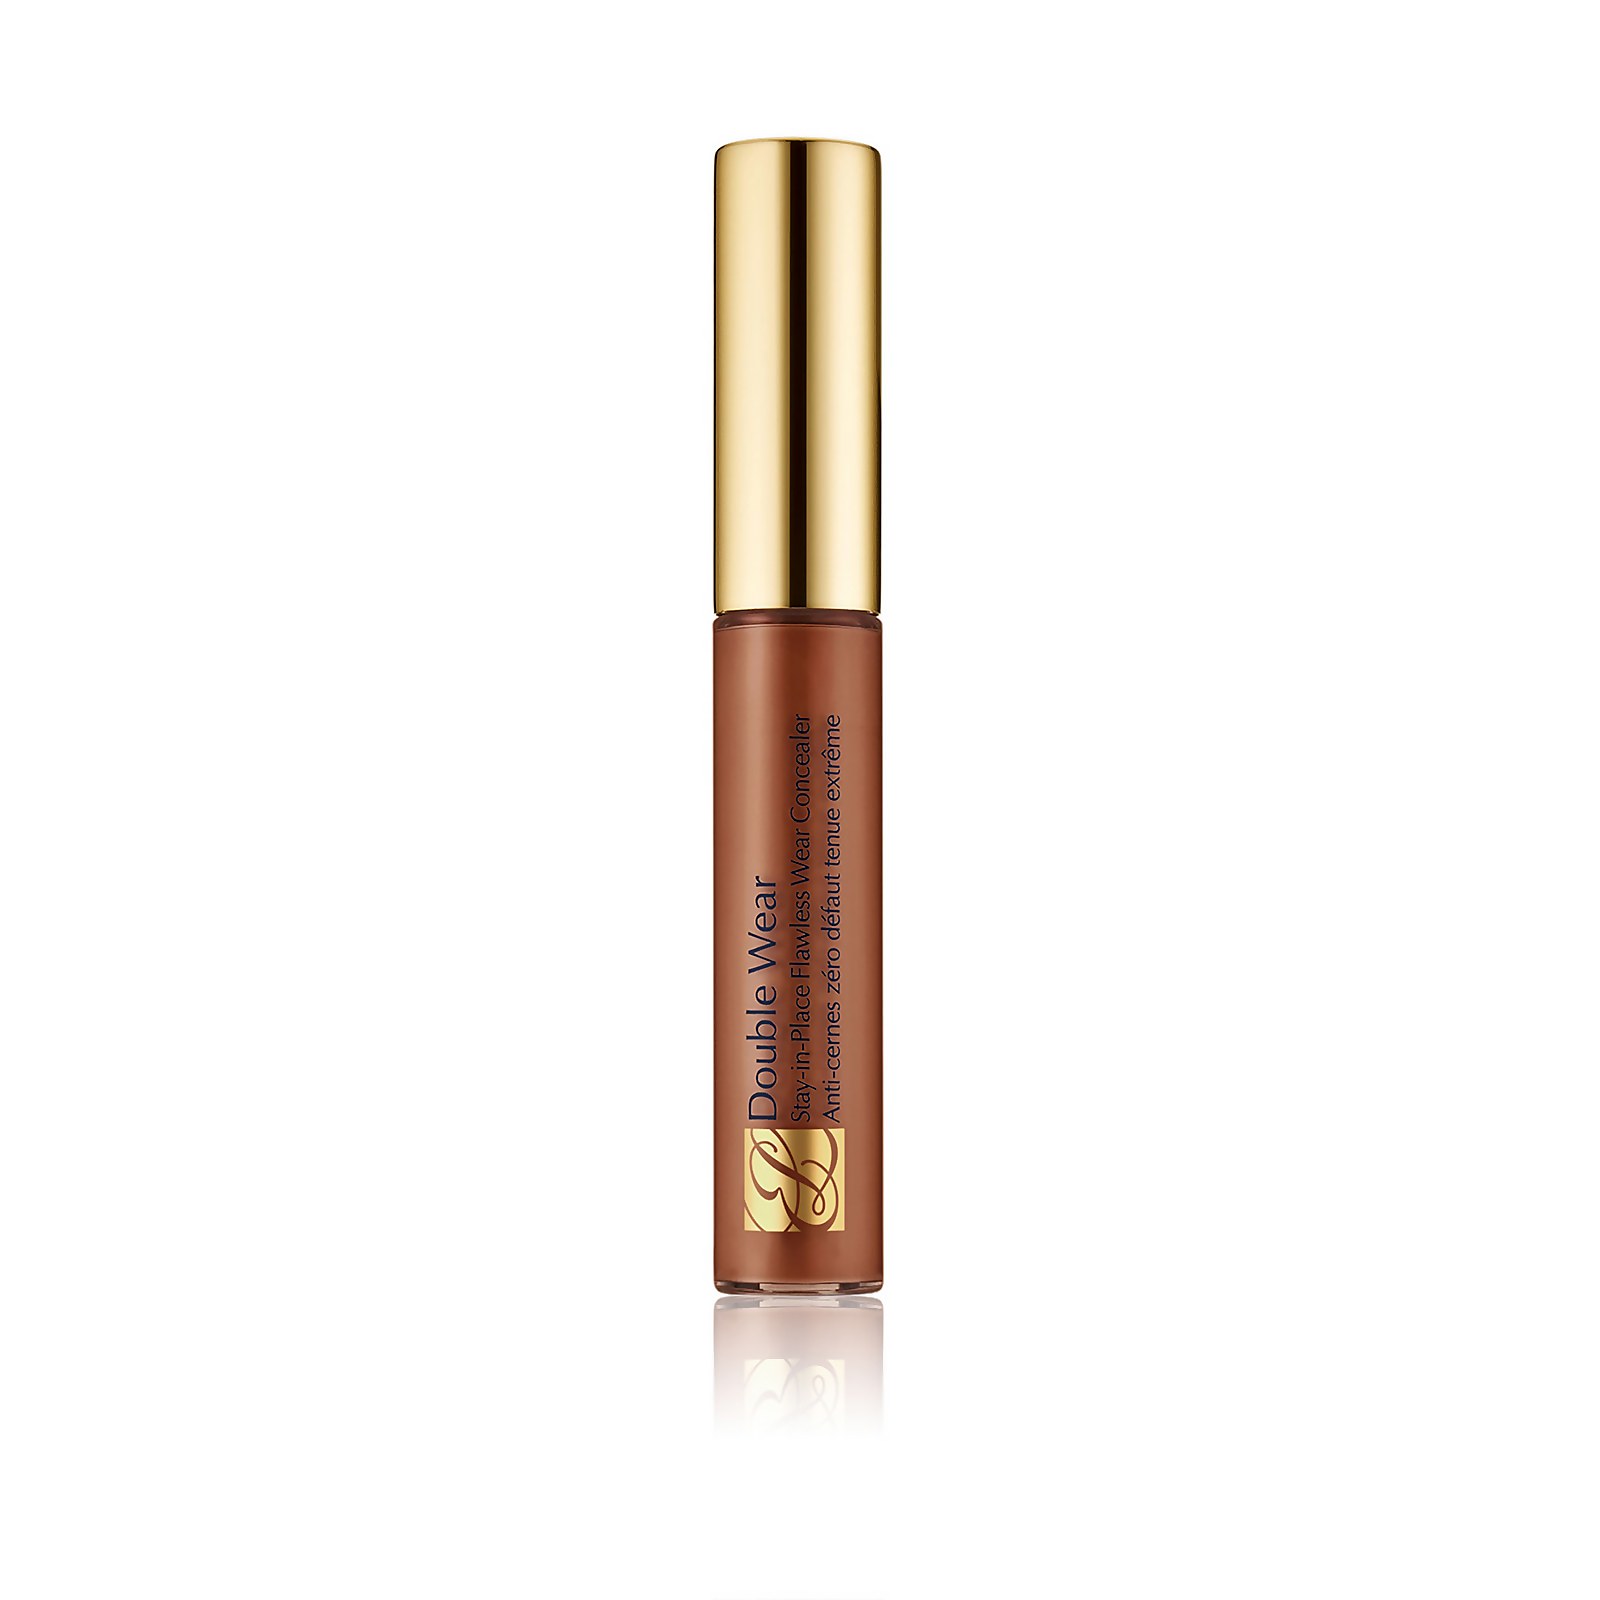 Estée Lauder Double Wear Stay-in-Place Flawless Wear Concealer 7ml (Various Shades) - 6C Extra Deep